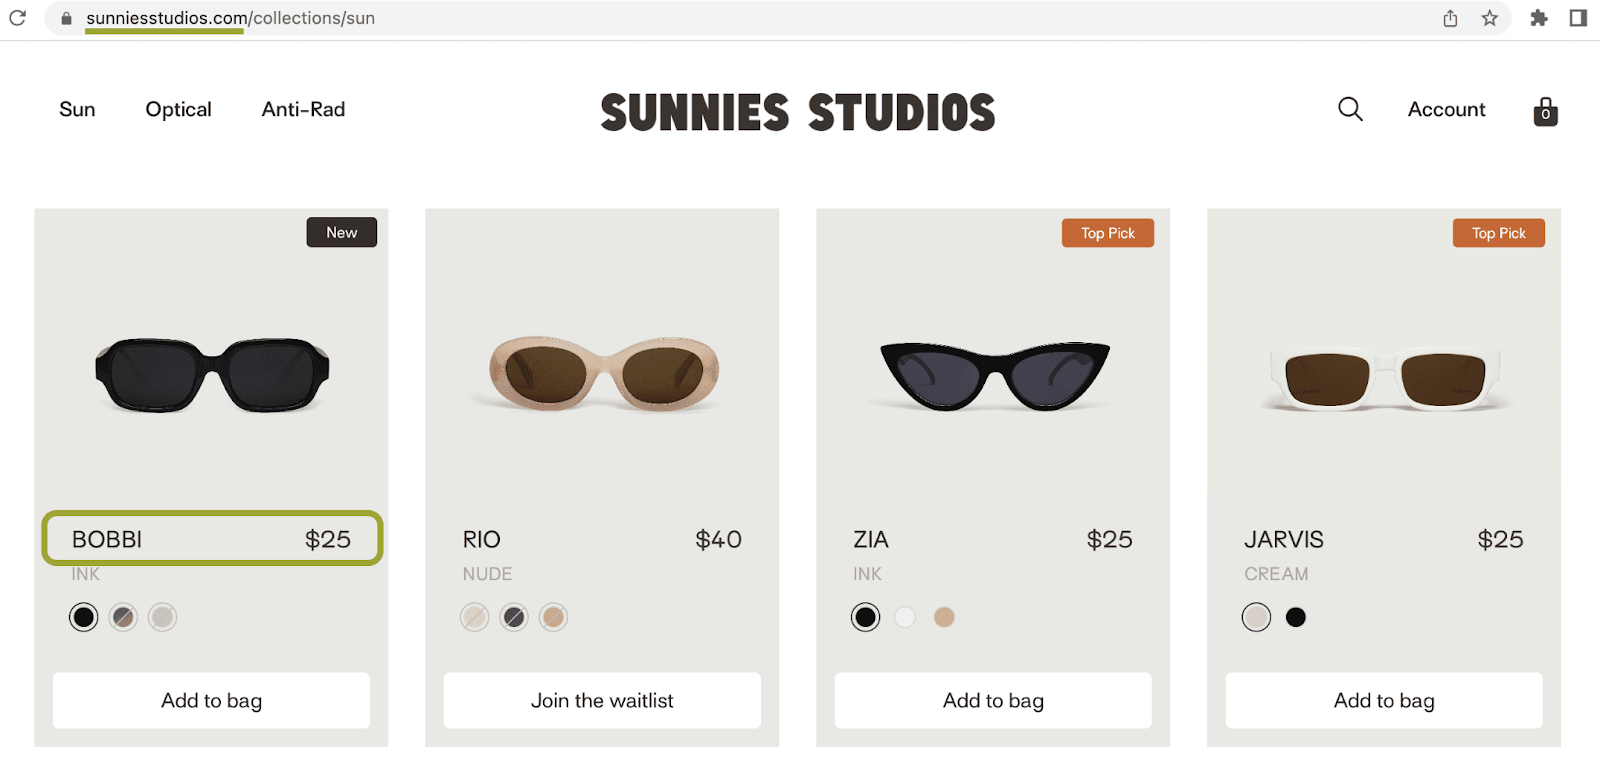 Screenshot of Sunnies Studios website showing sunglasses for sale with USD prices